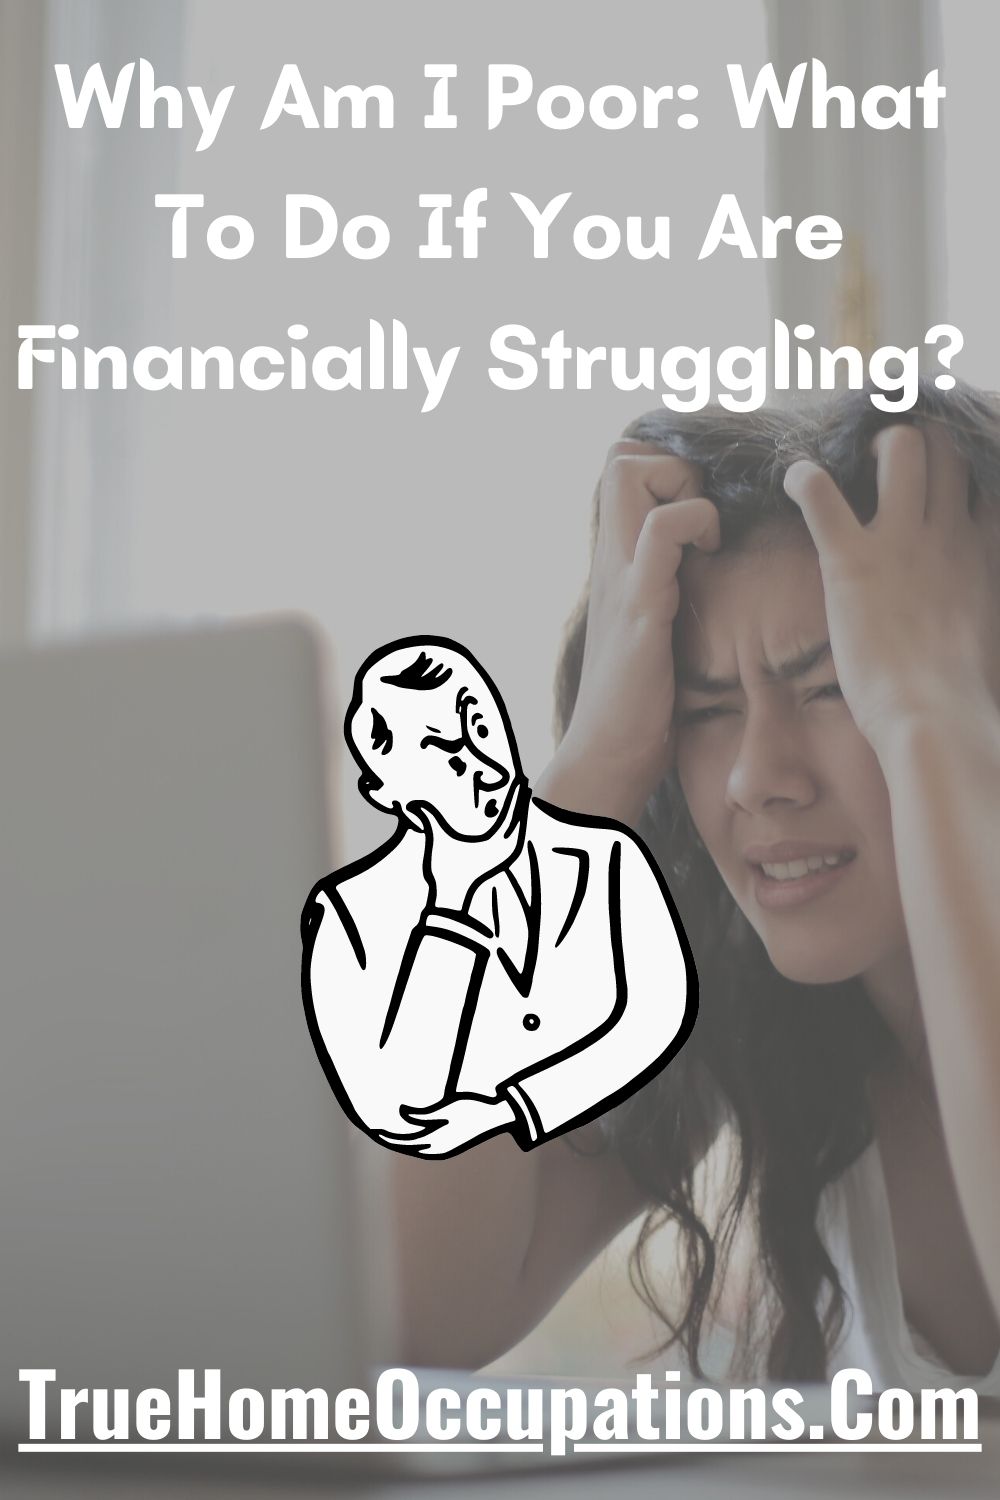 Why Am I Poor: What To Do If You Are Financially Struggling? - TrueHomeOccupations.Com